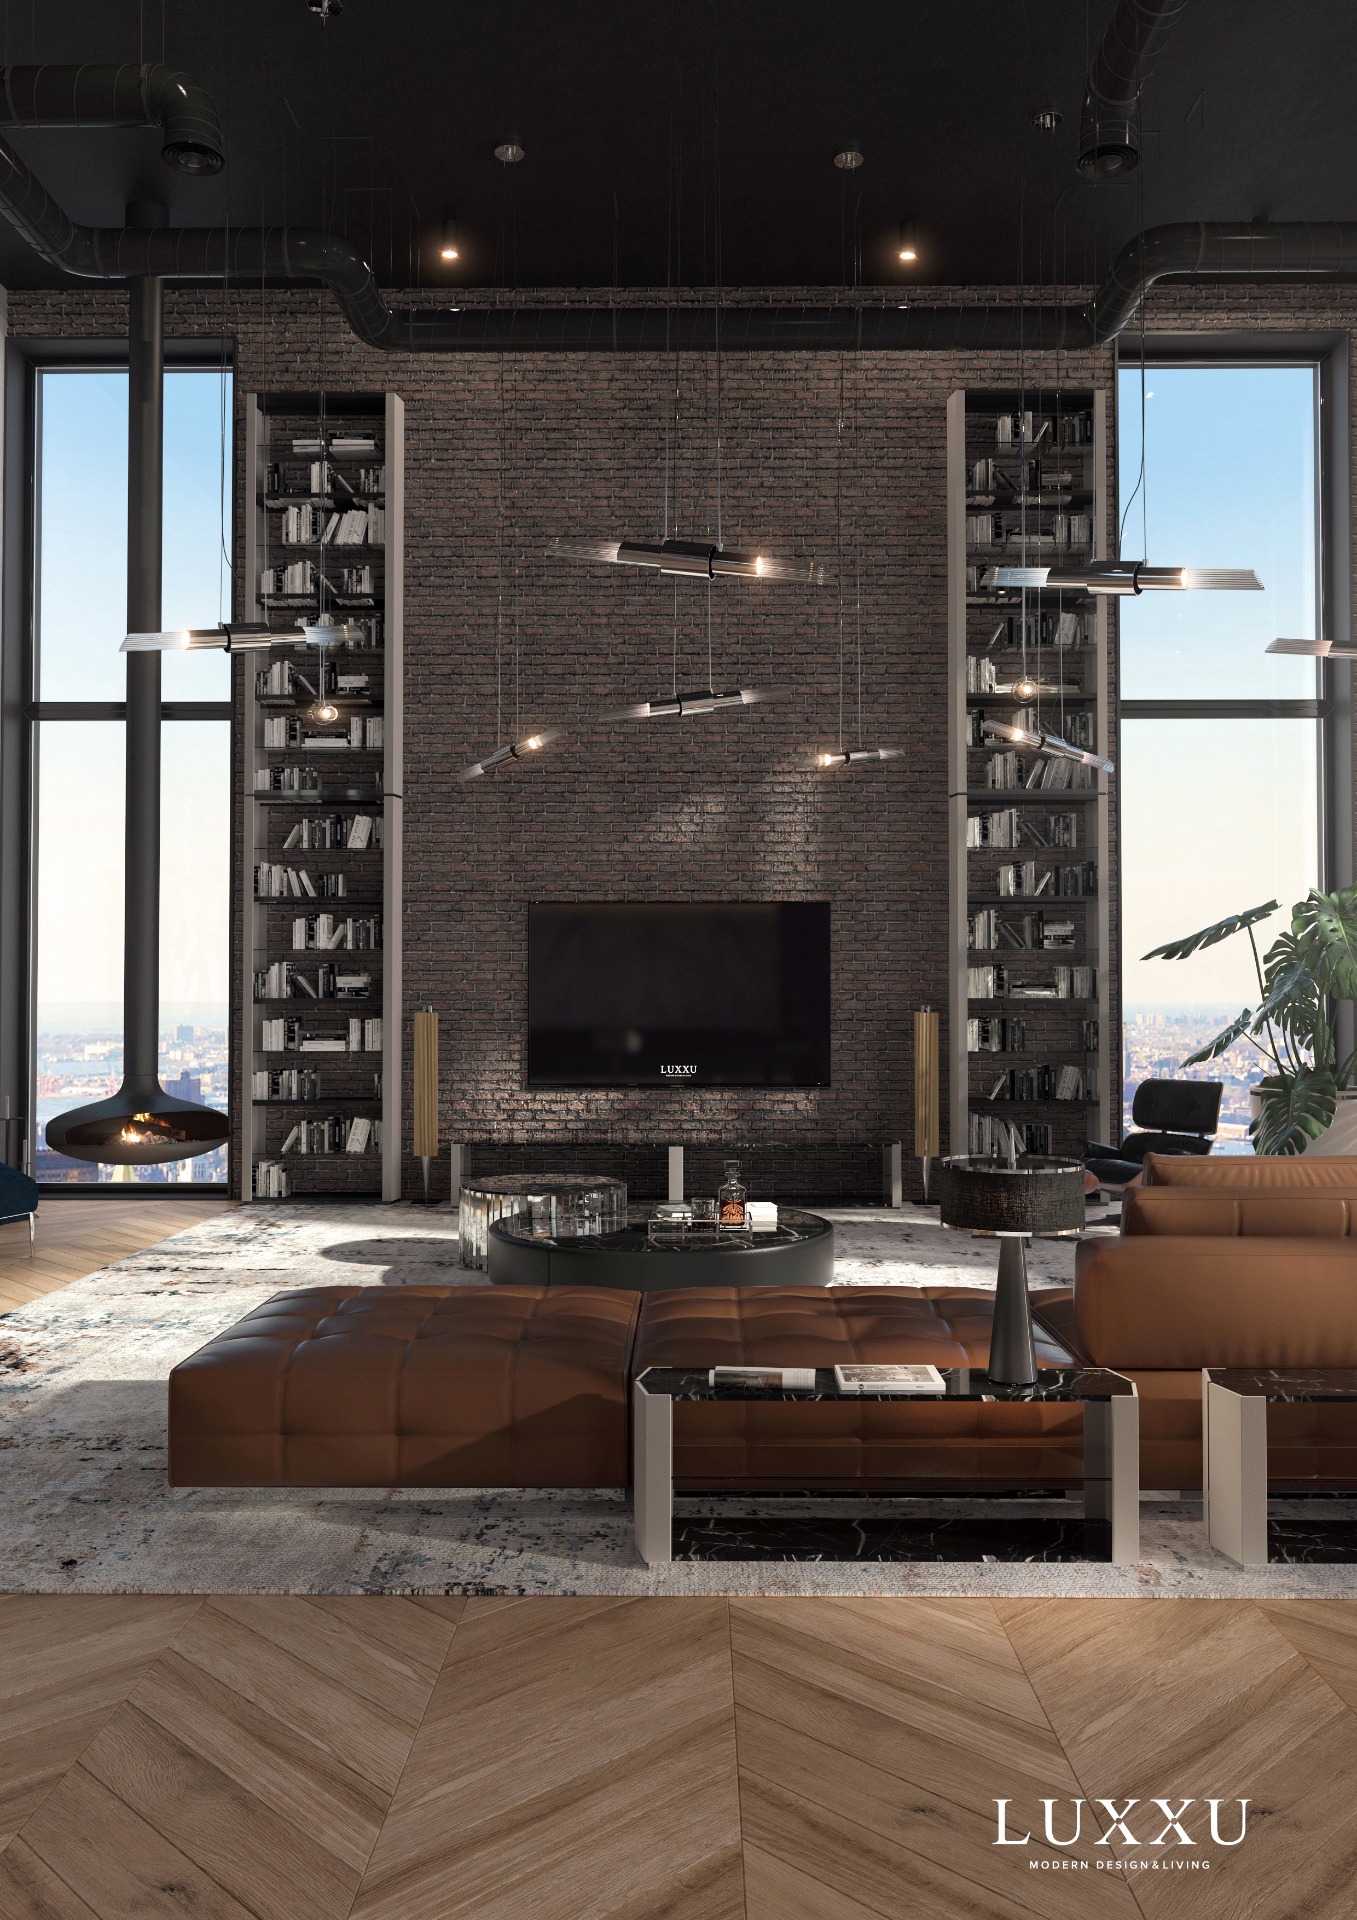 Living Room Design - An Industrial And Stylish Ambiance By Luxxu